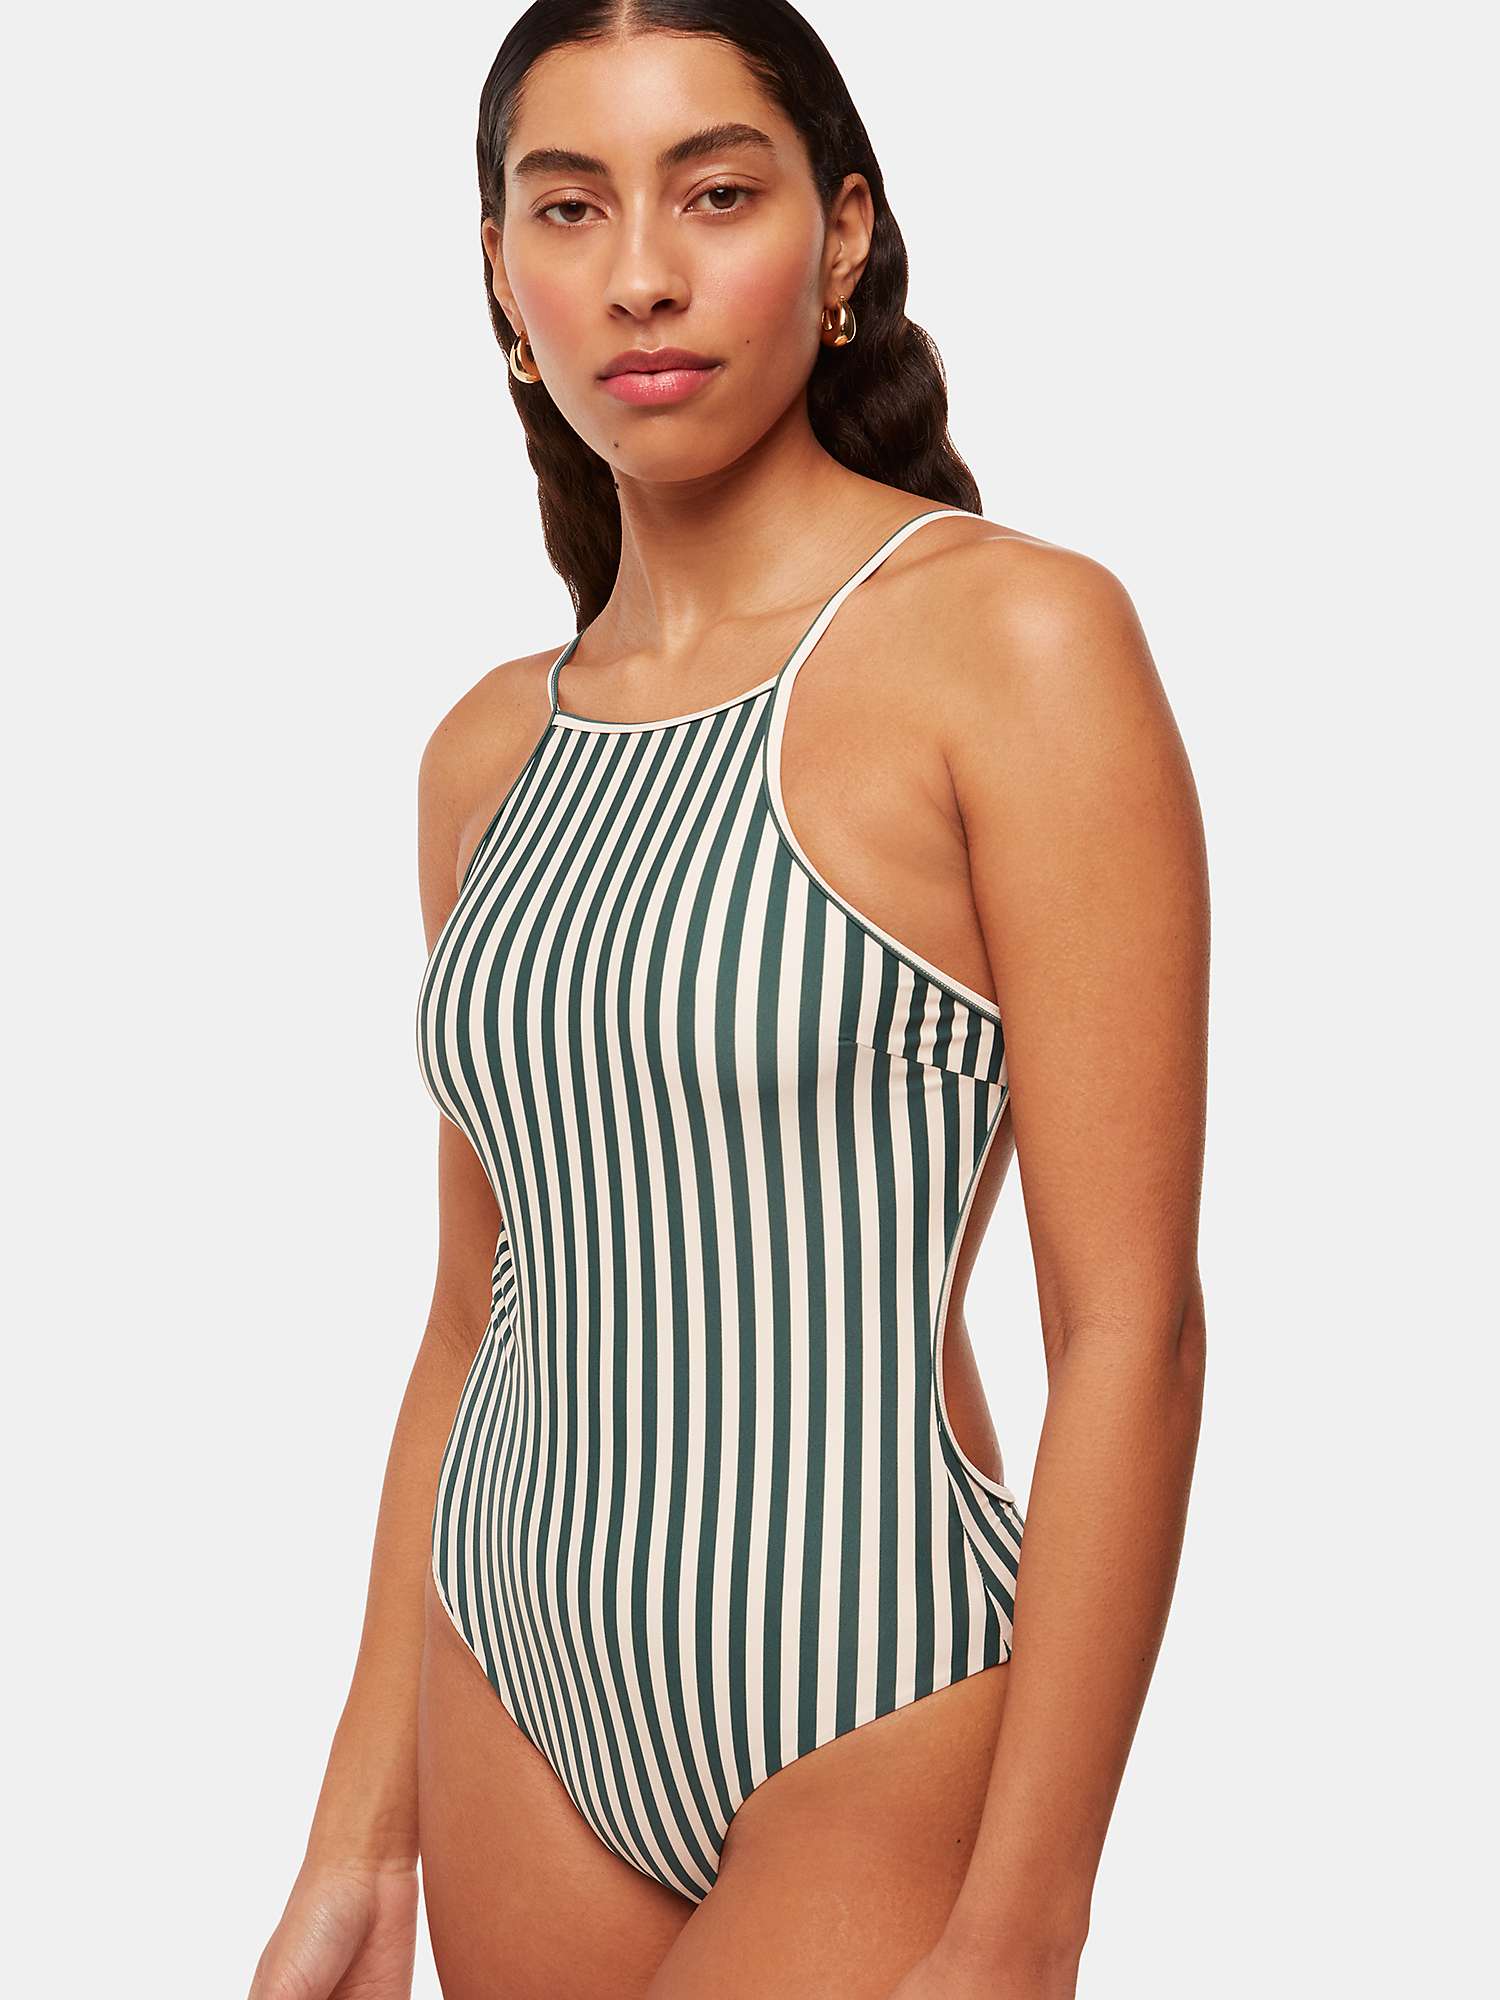 Buy Whistles Striped Open Back Swimsuit, Green/White Online at johnlewis.com